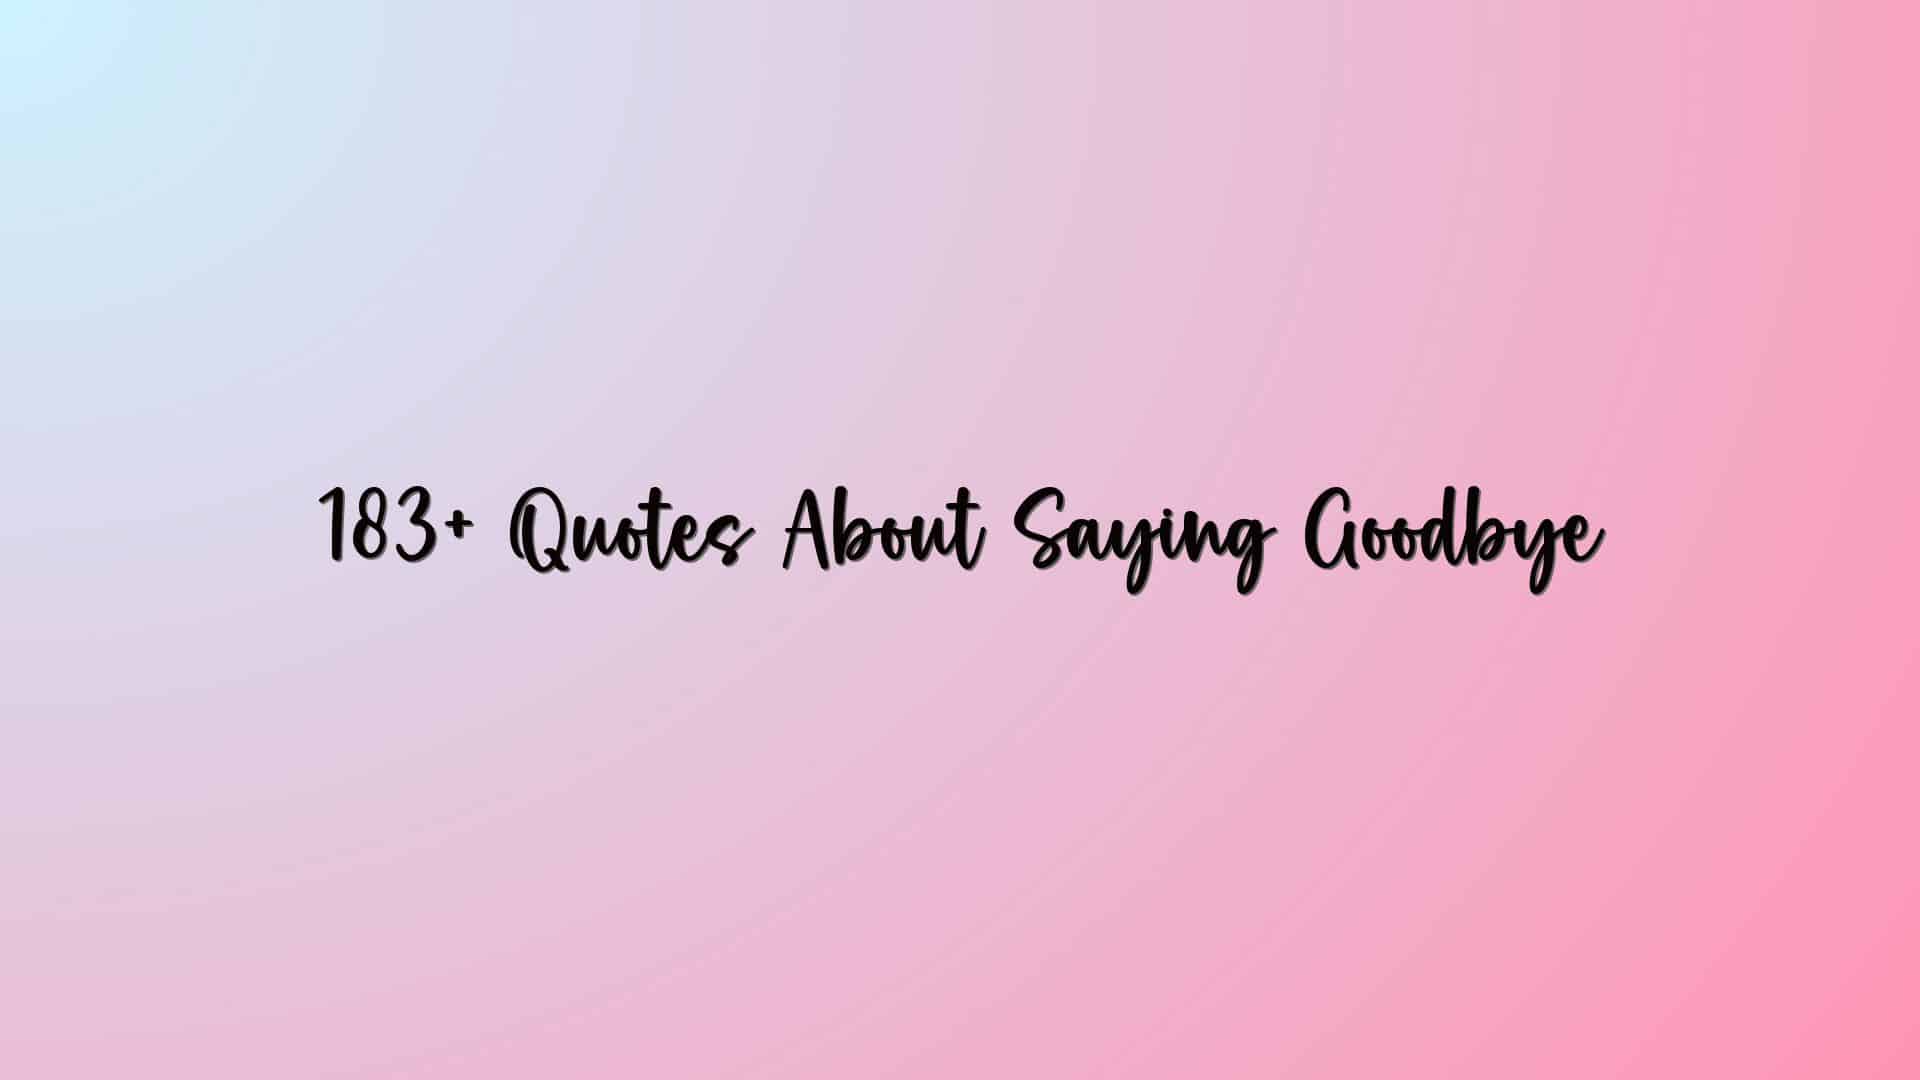 183+ Quotes About Saying Goodbye